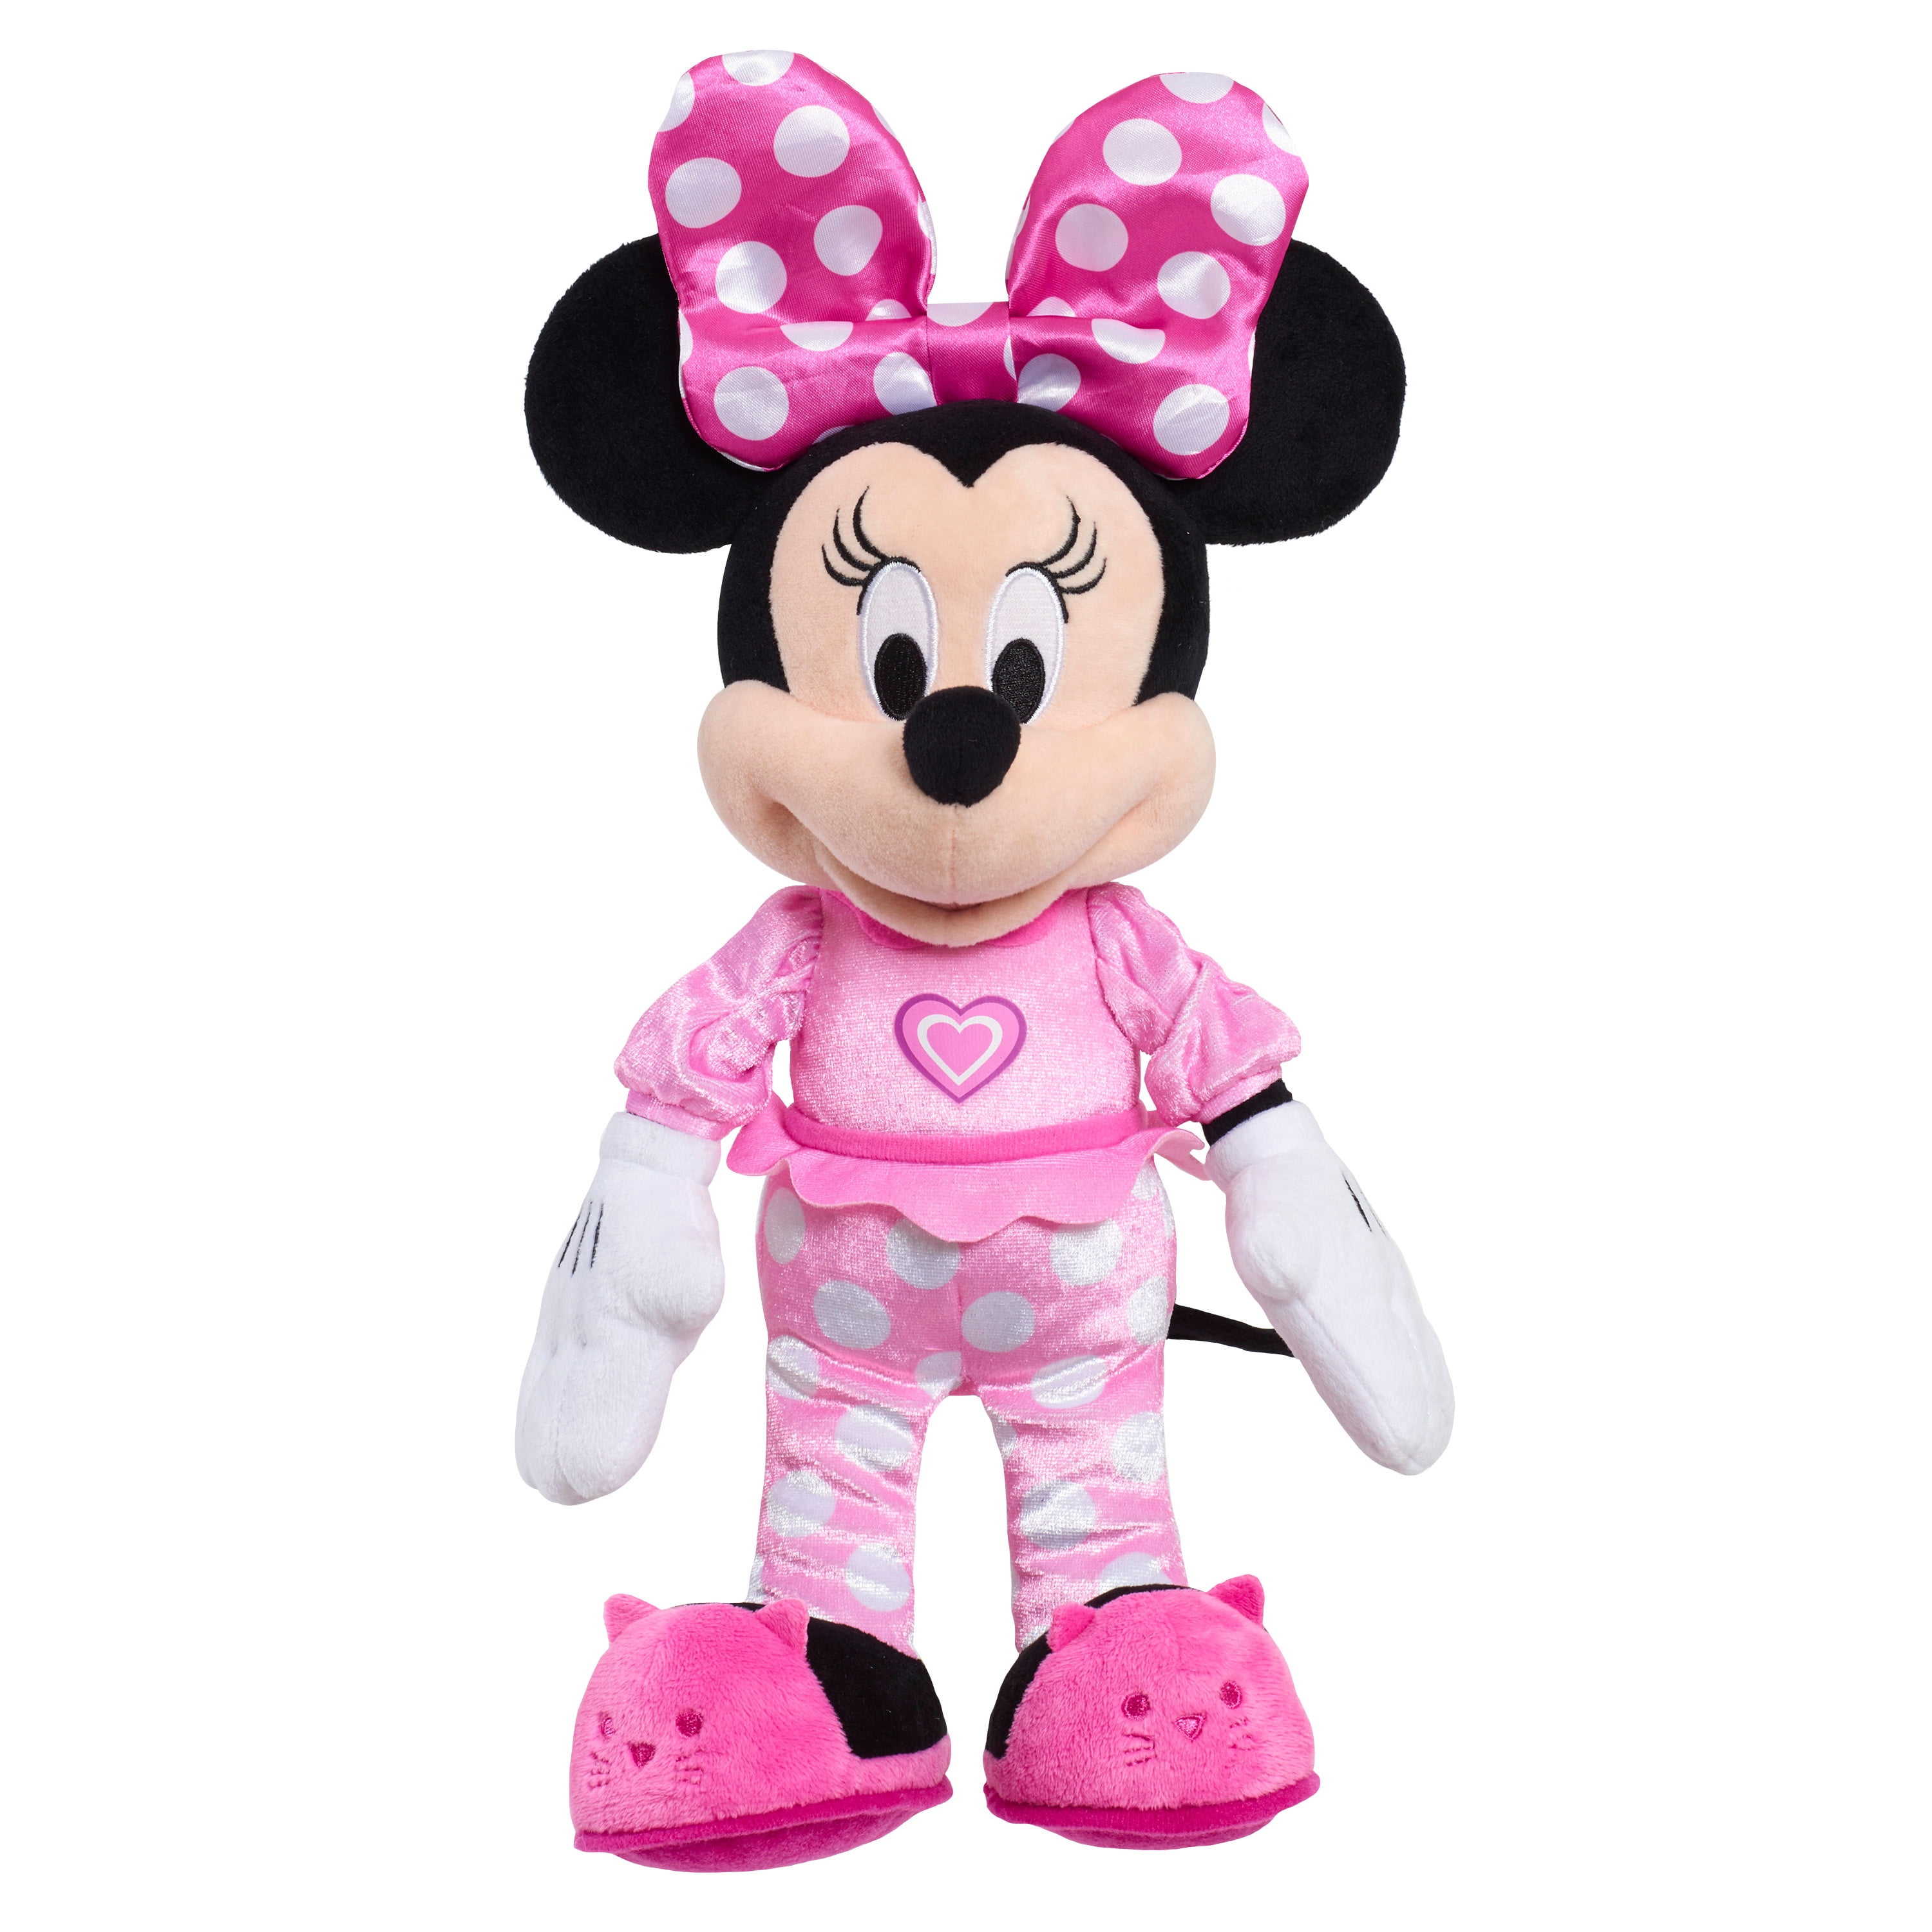 Disney Minnie Mouse Plush Stuffed Animal by Just Play Spring Outfit for sale online 